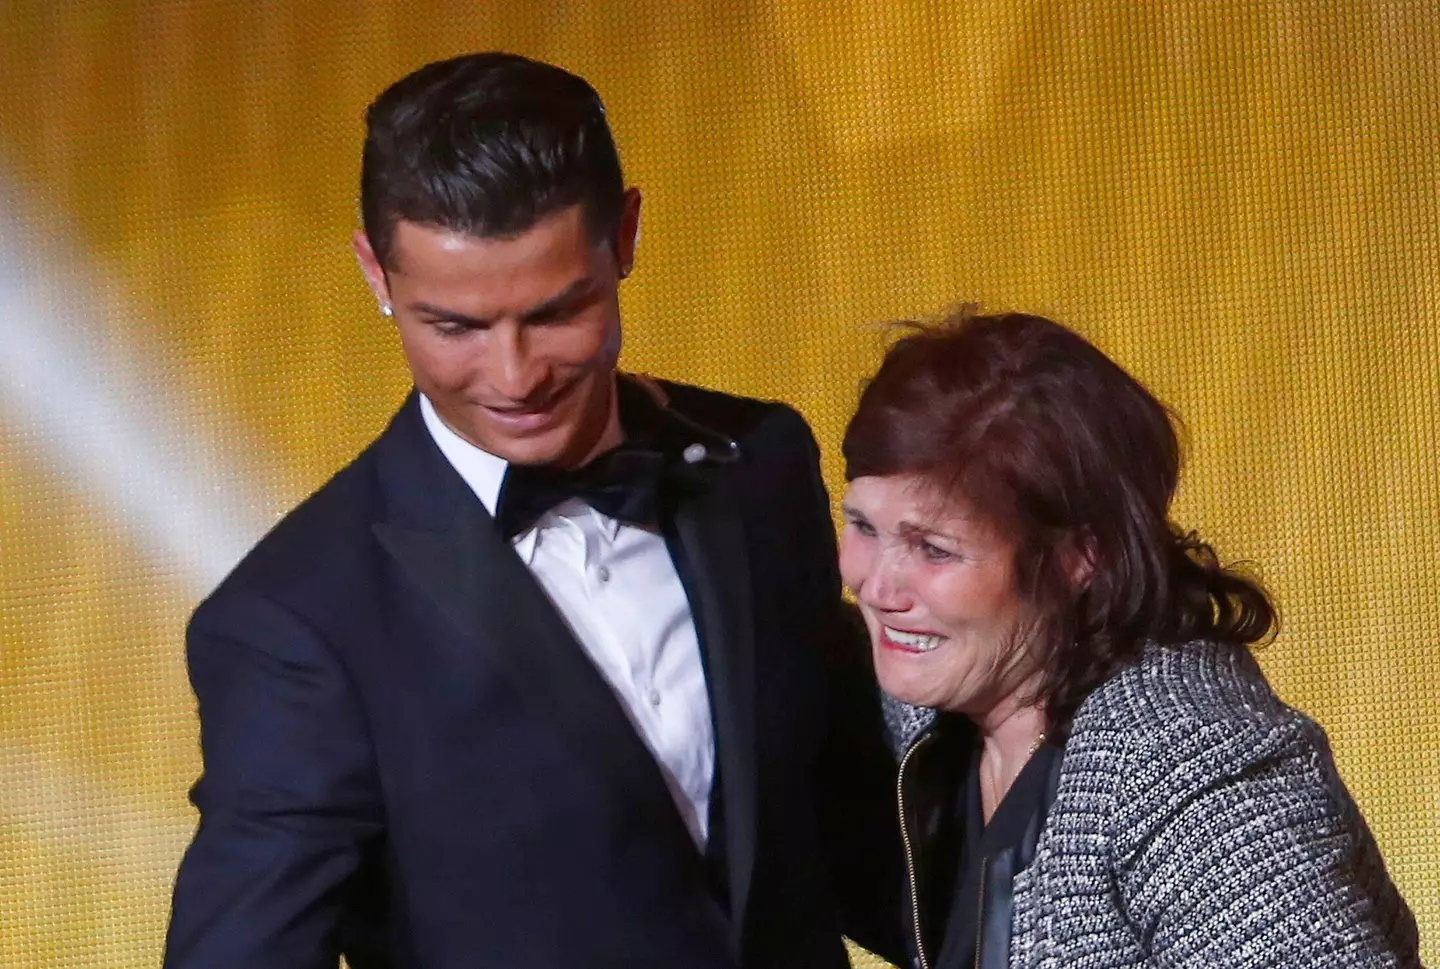 Cristiano Ronaldo's mother explained she would 'have liked' his father to 'be around more'.